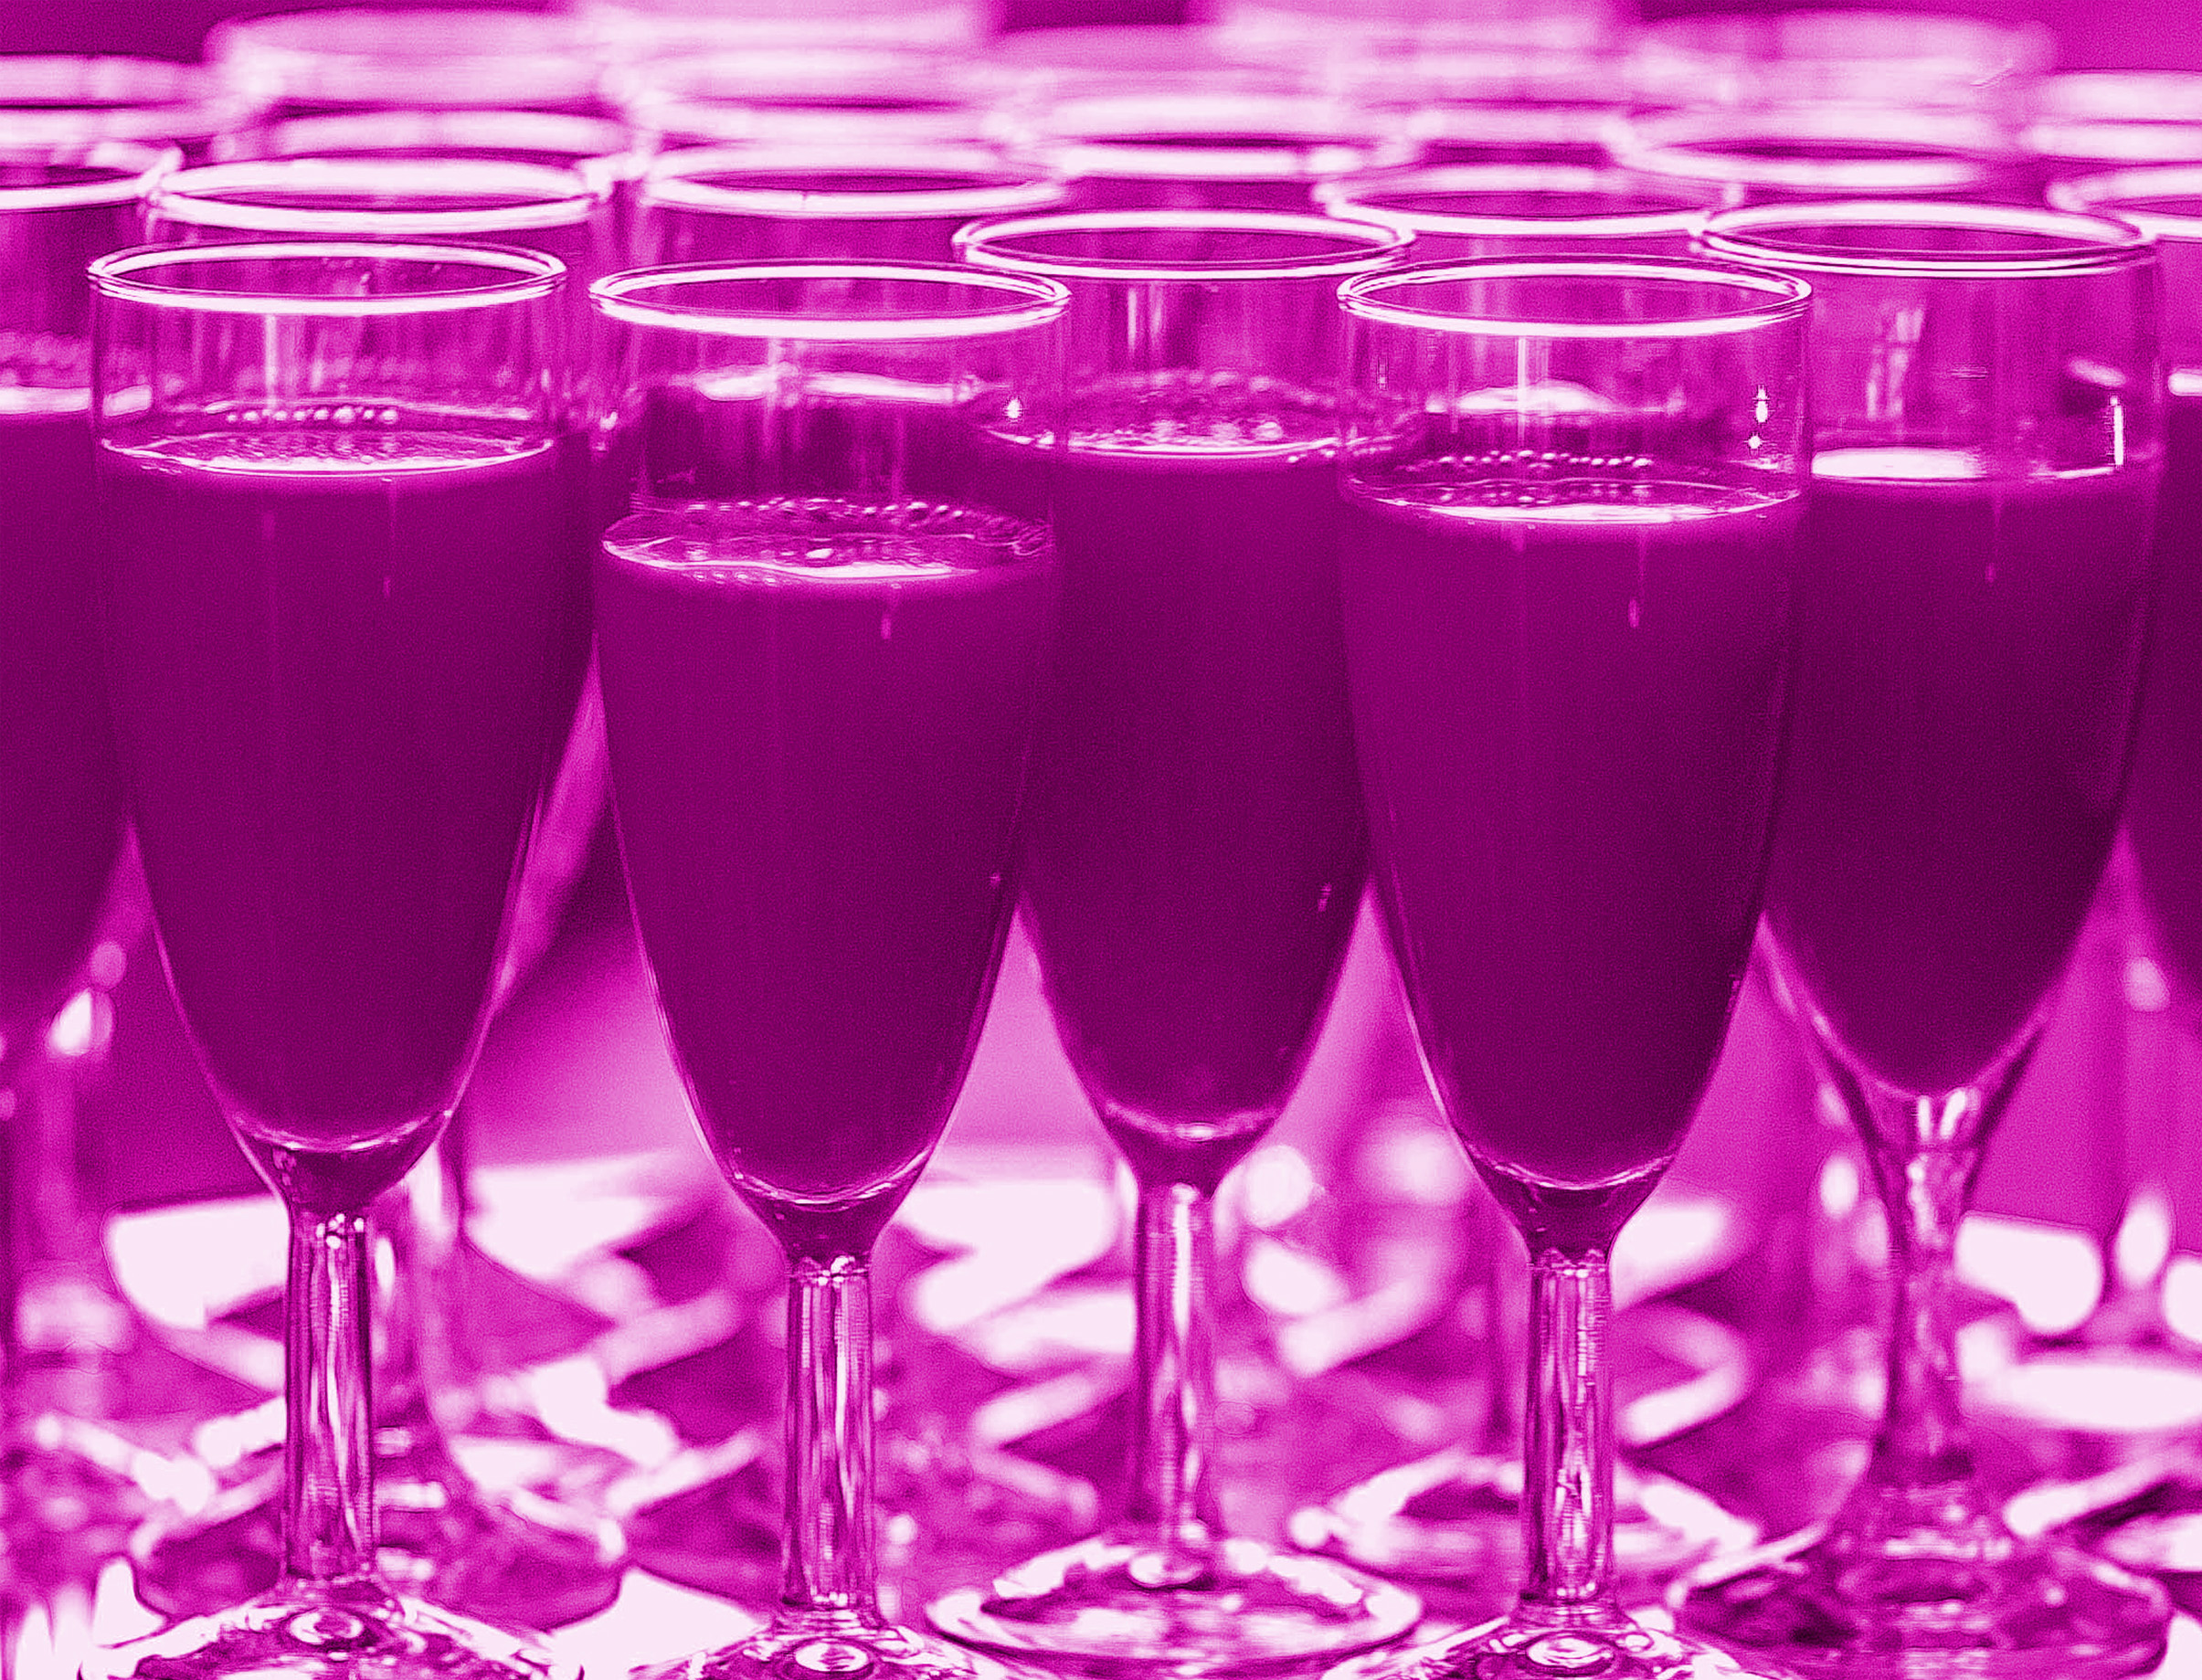 Cocktail glasses - pink colored photo